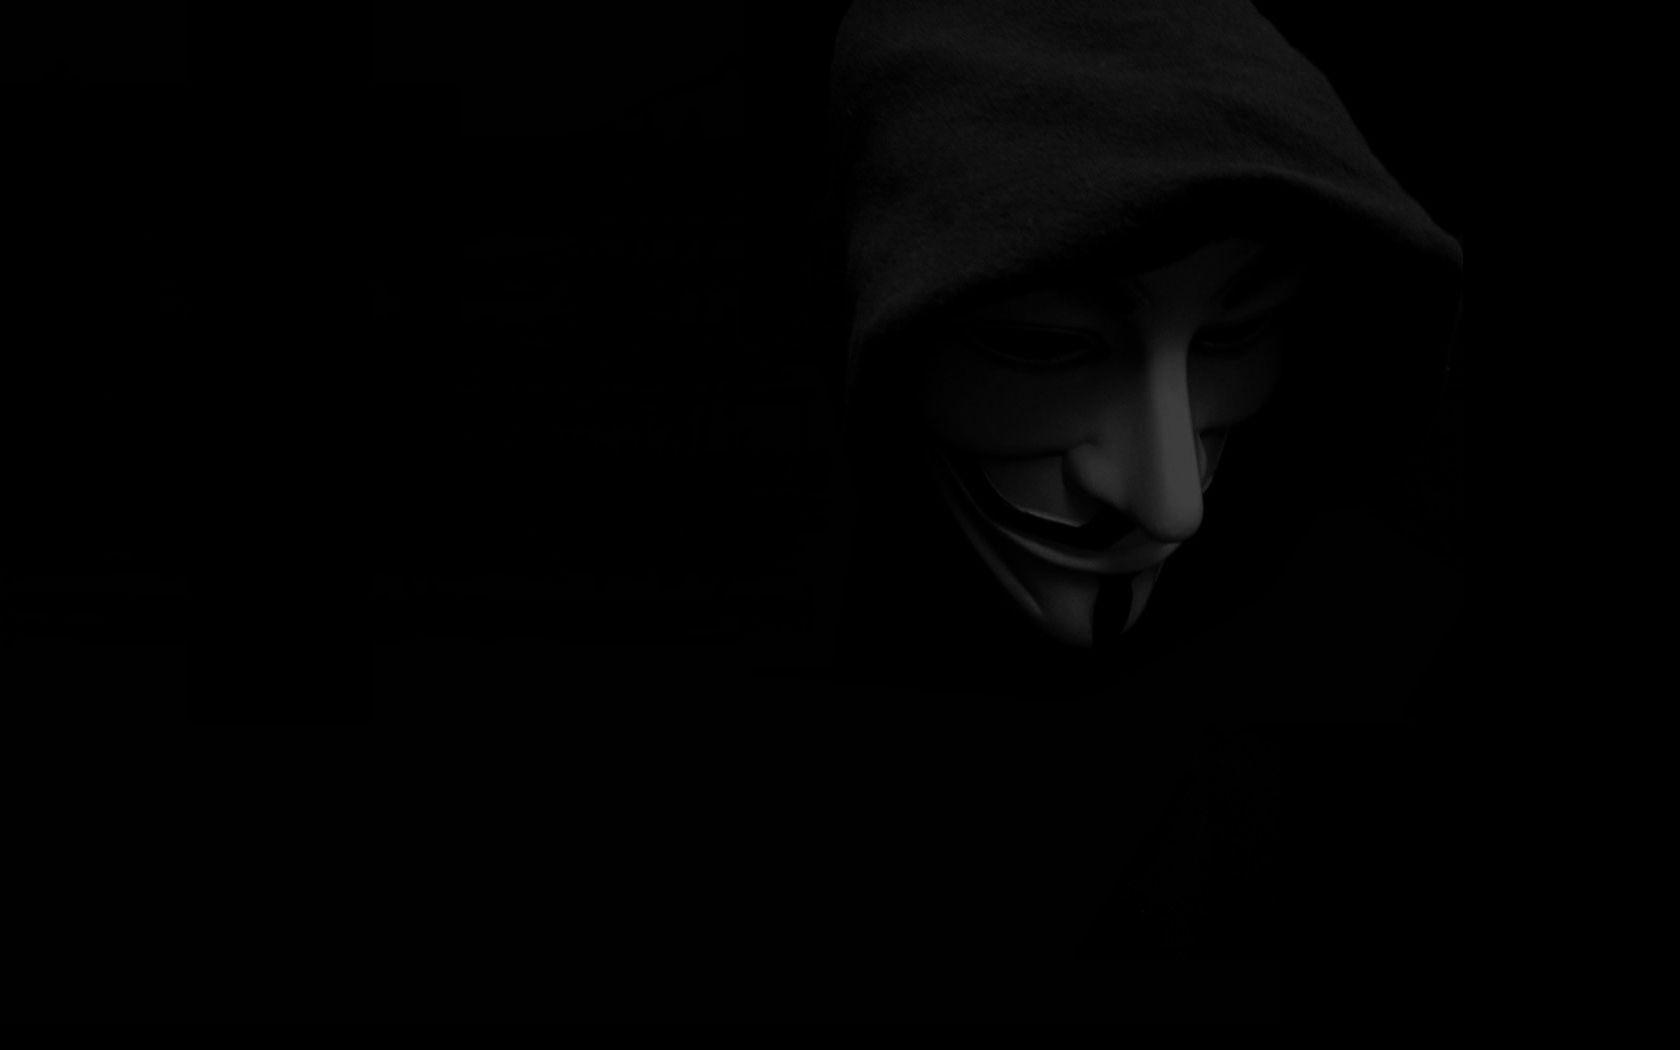 Anonymous Wallpapers Wallpaper Cave